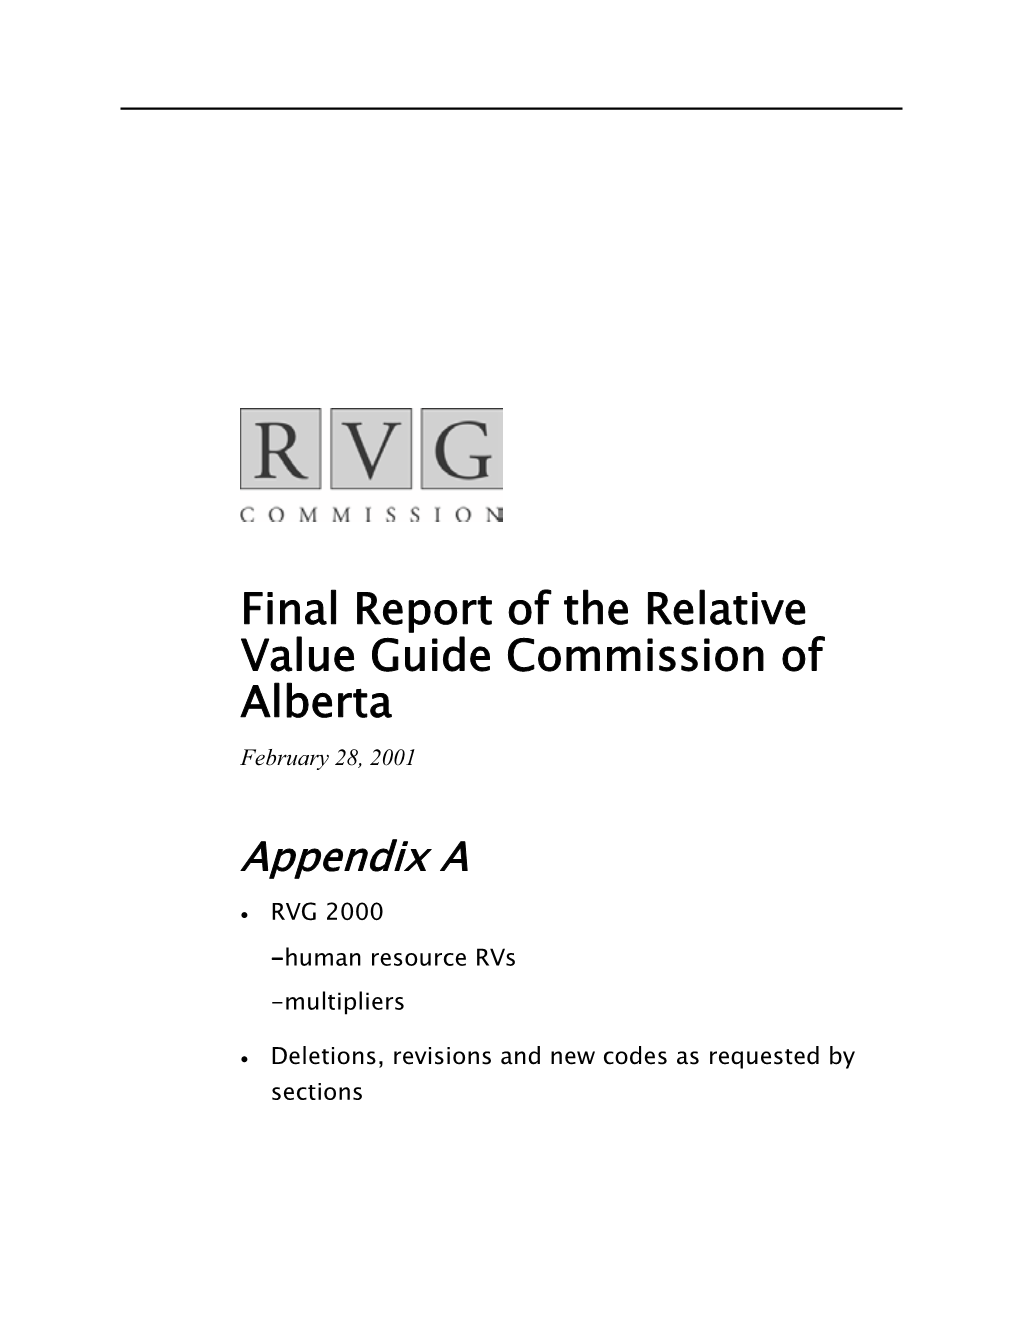 Final Report of the Relative Value Guide Commission of Alberta February 28, 2001